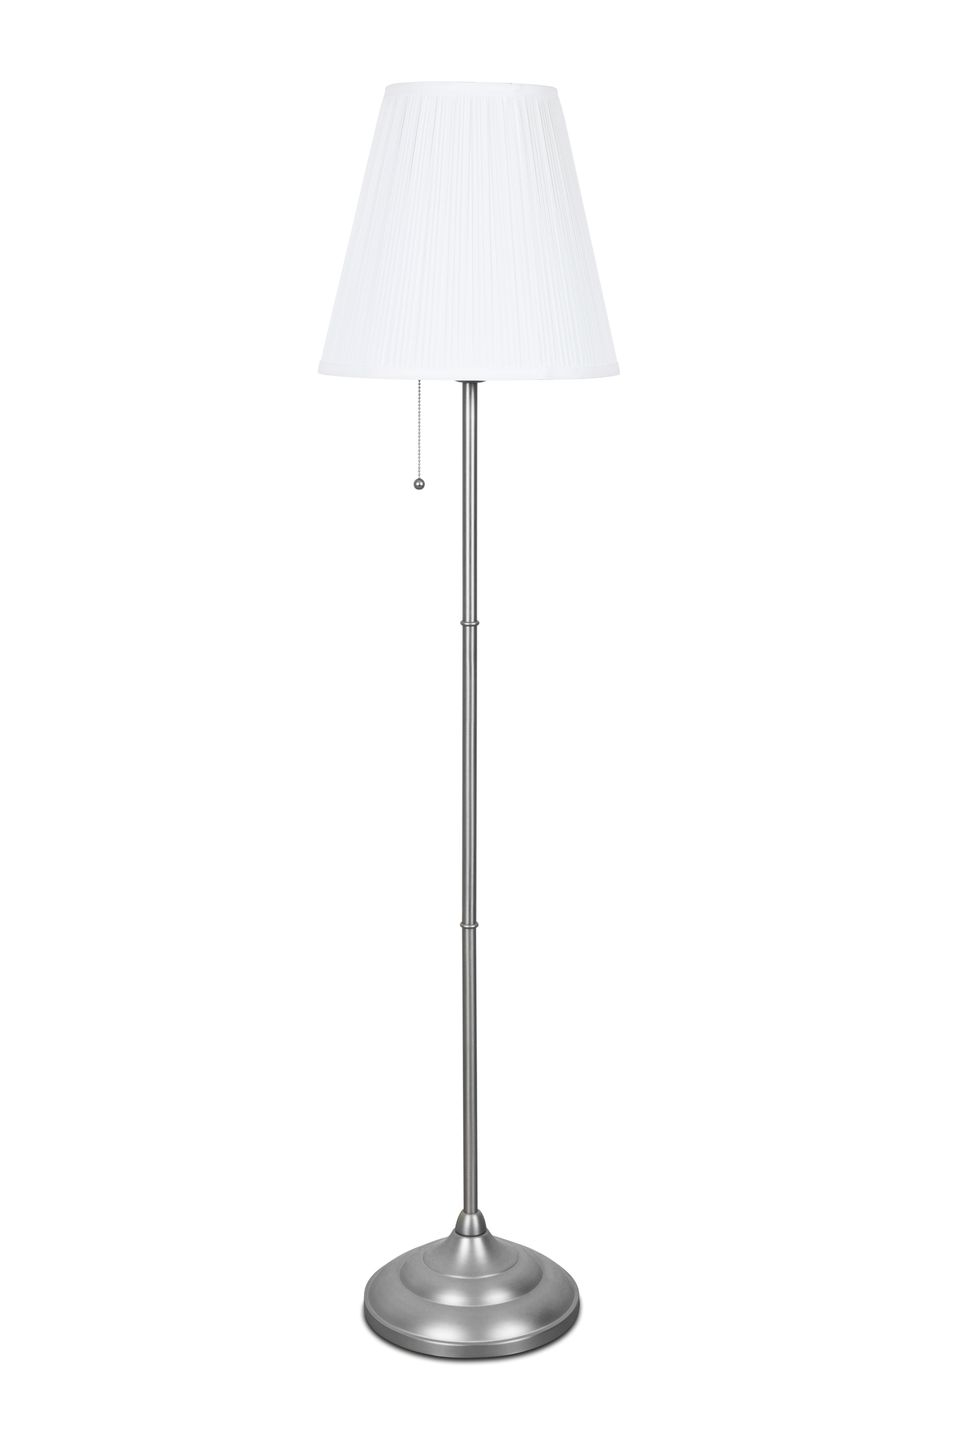 Different Types Of Floor Lamps with size 960 X 1440